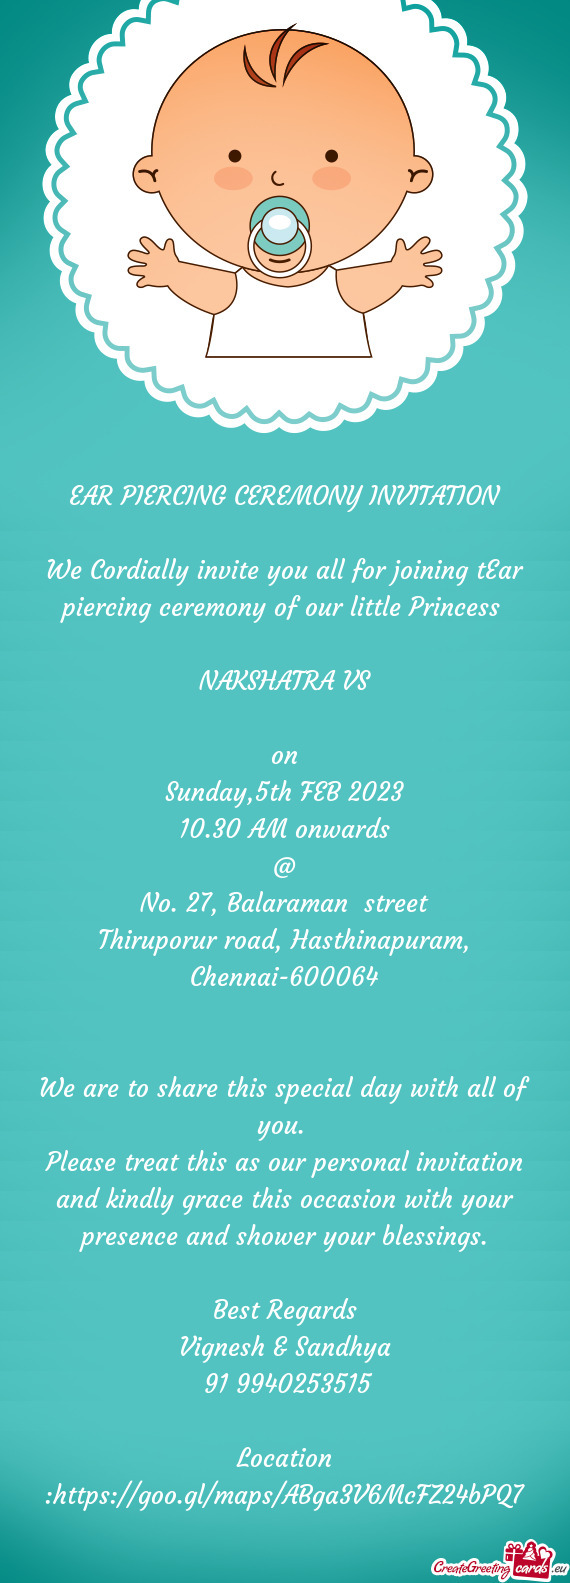 We Cordially invite you all for joining tEar piercing ceremony of our little Princess